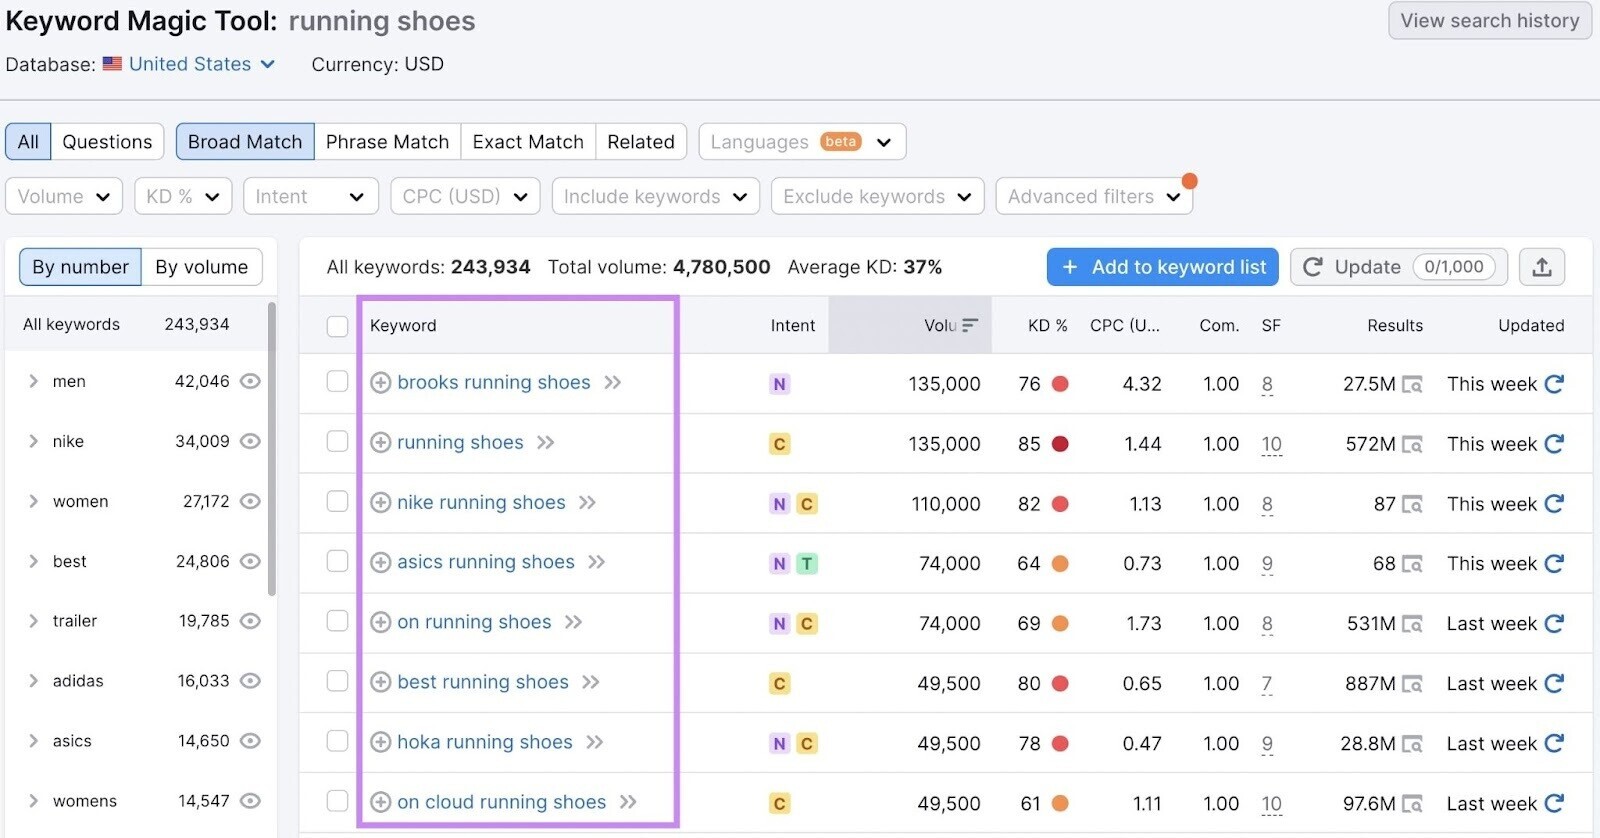 results for "running shoes" search in Keyword Magic Tool